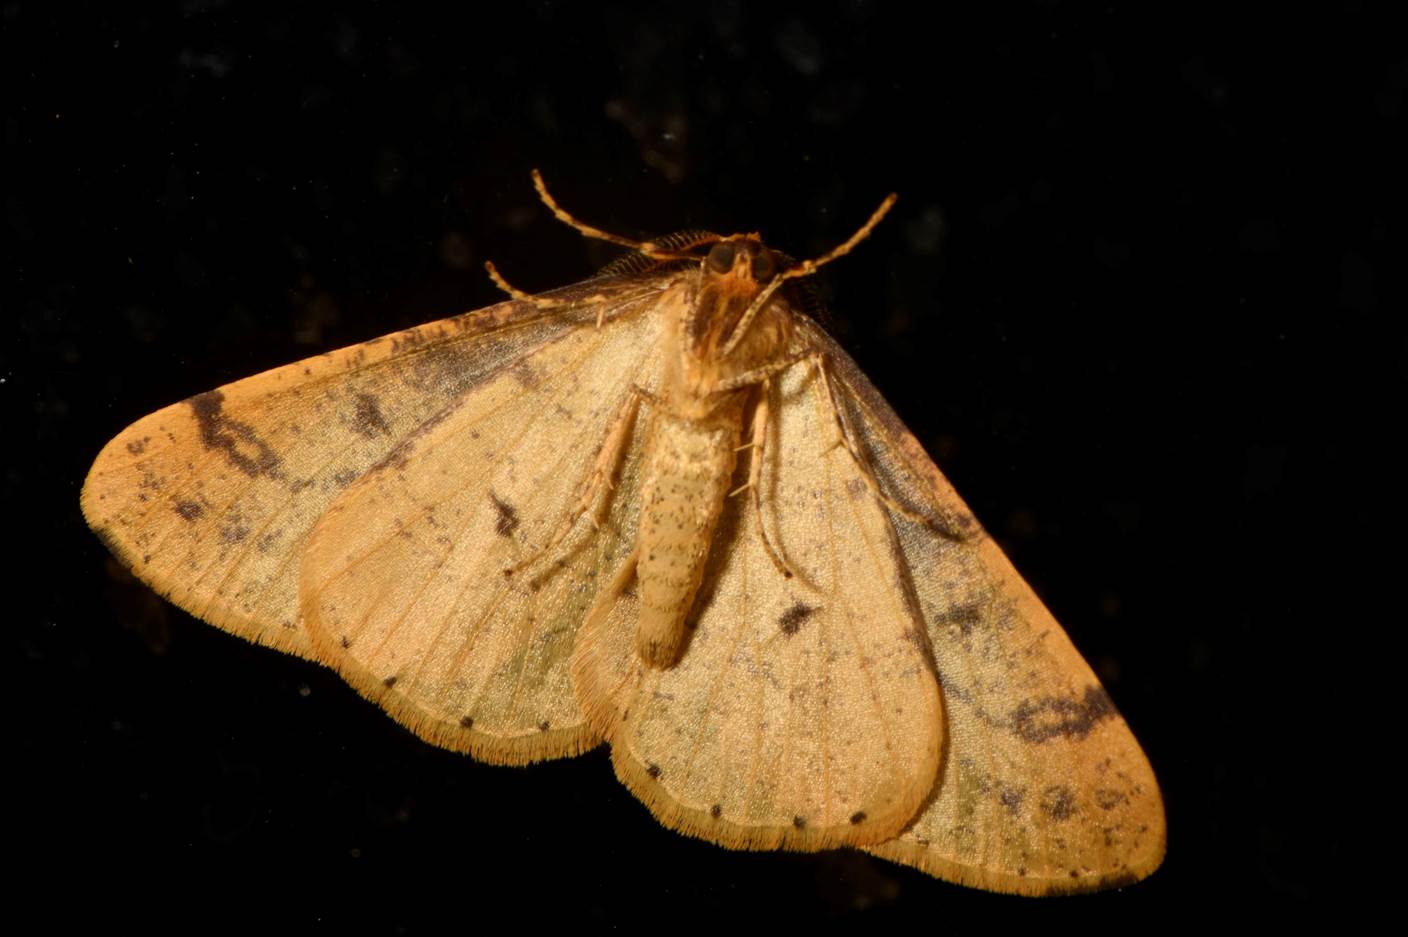 A moth with wings spread out

Description automatically generated